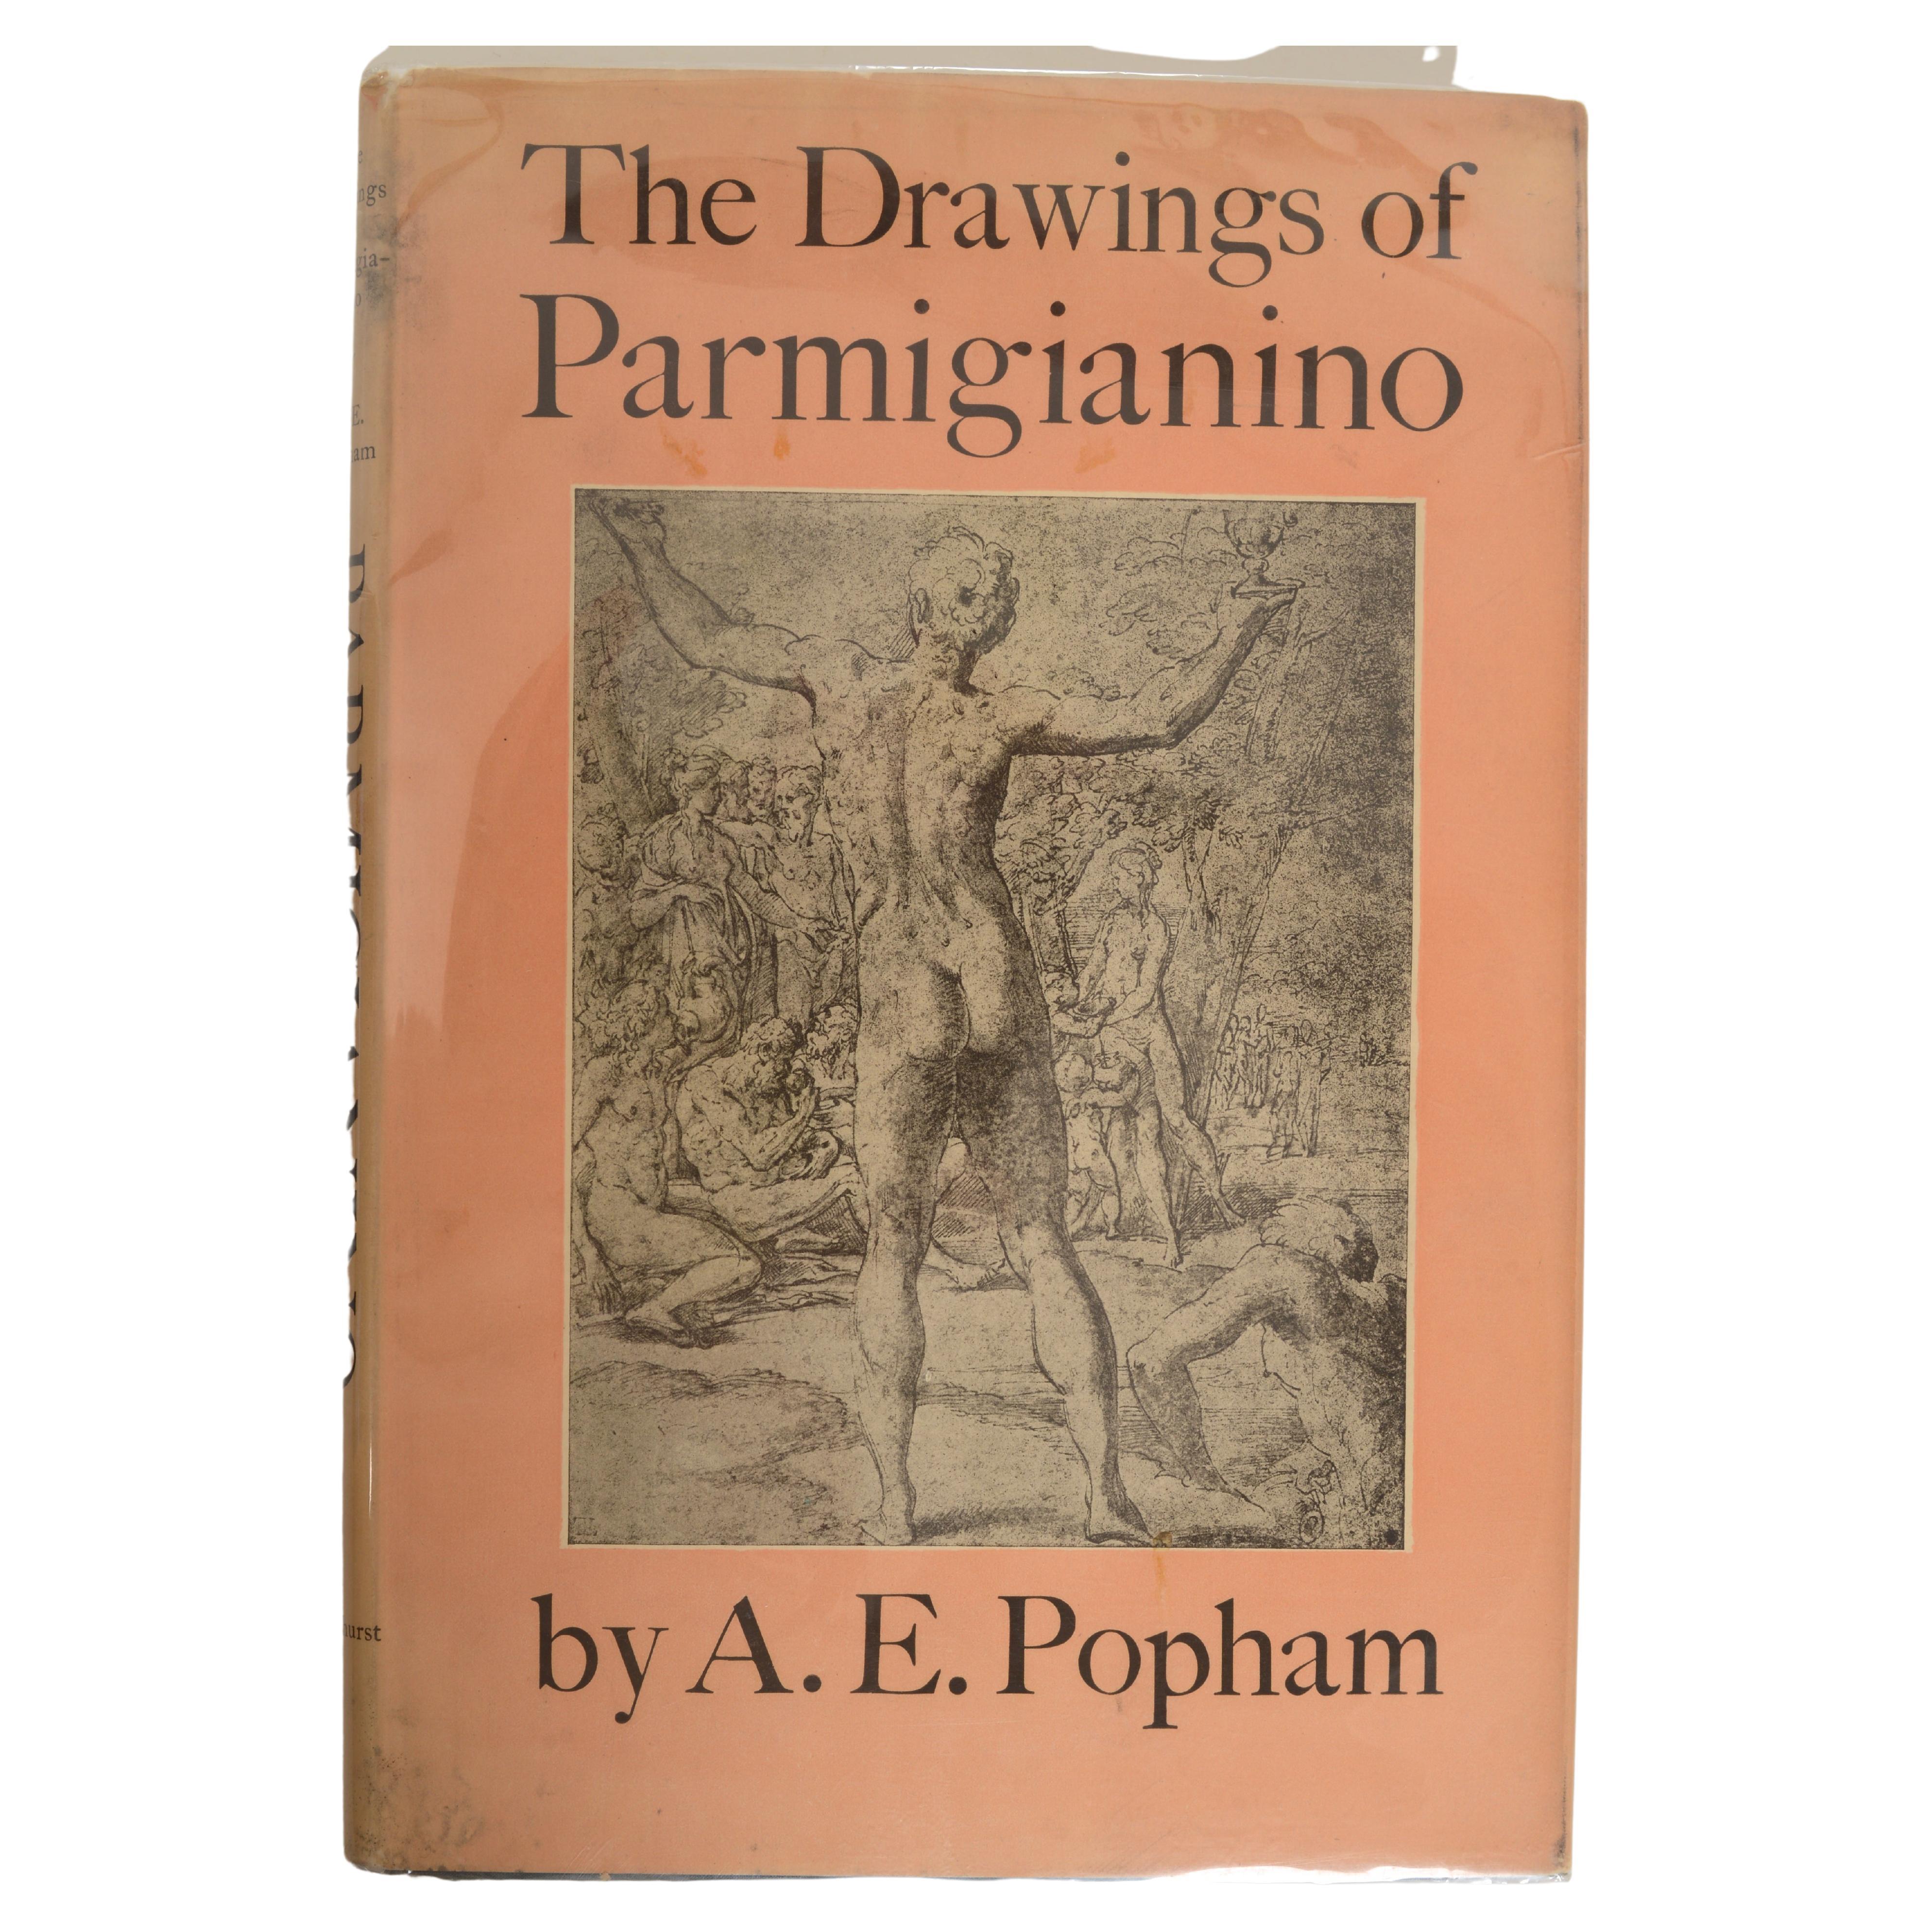 Drawings of Parmigianino by a. E. Popham, 1st Ed For Sale